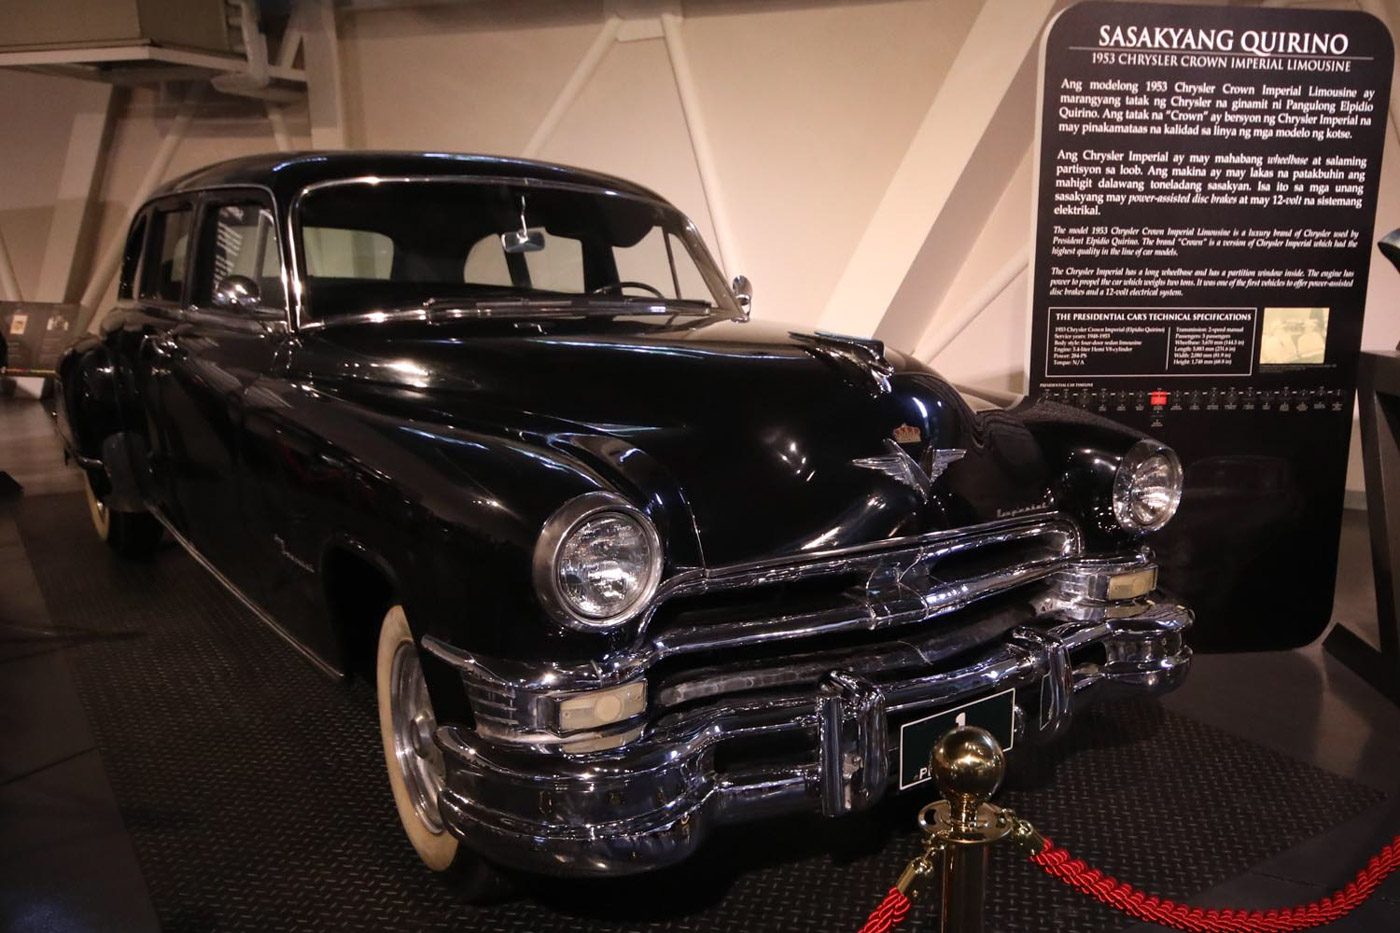 IN PHOTOS: Cars used by Philippine presidents now on display